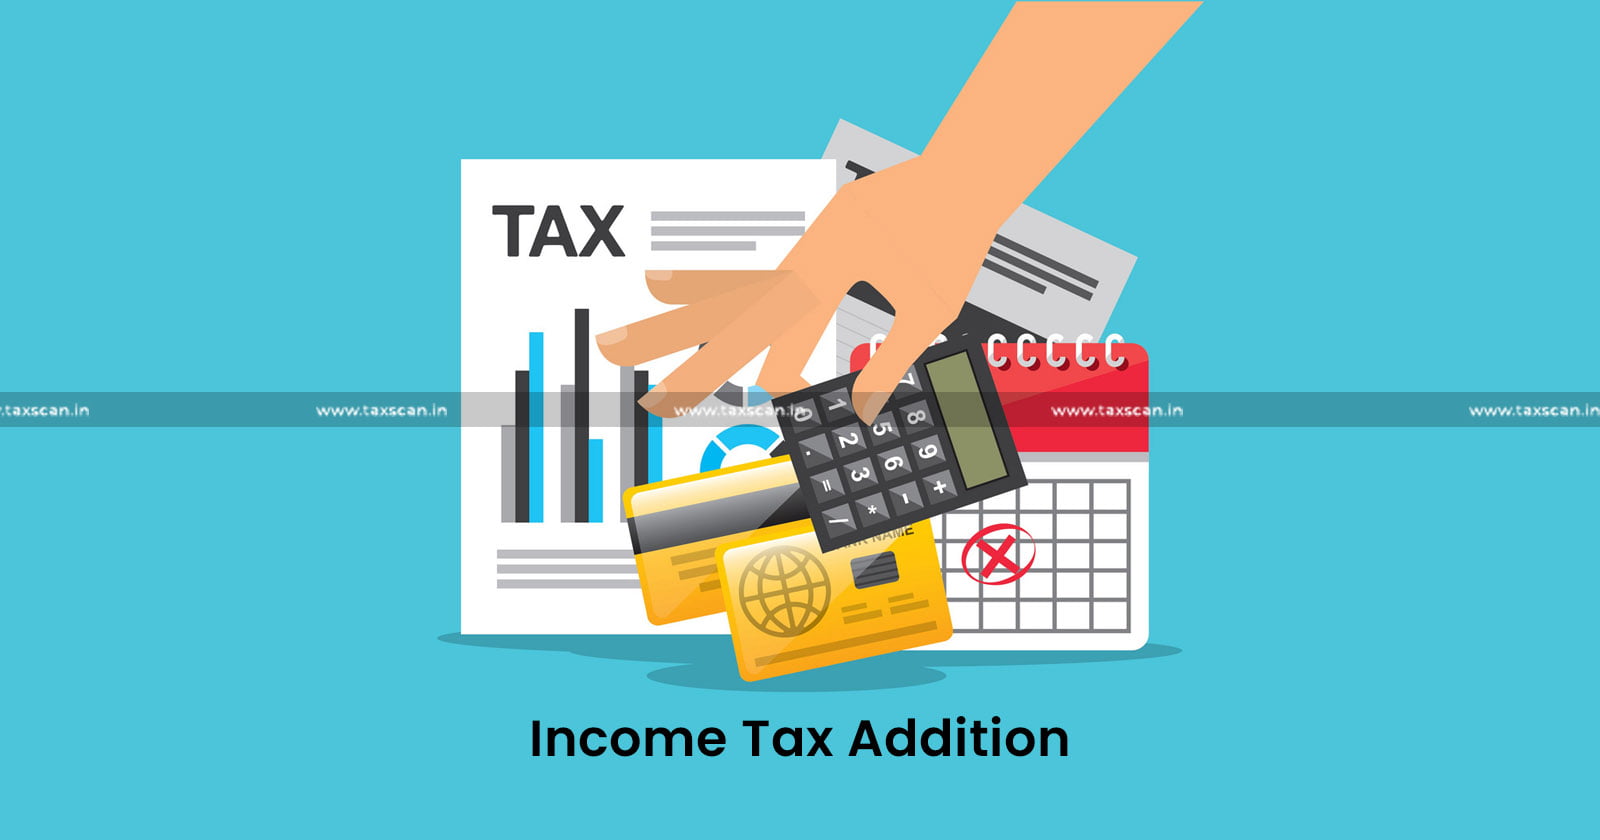 No investment - investment - books of Accounts - ITAT - Income Tax Addition - taxscan